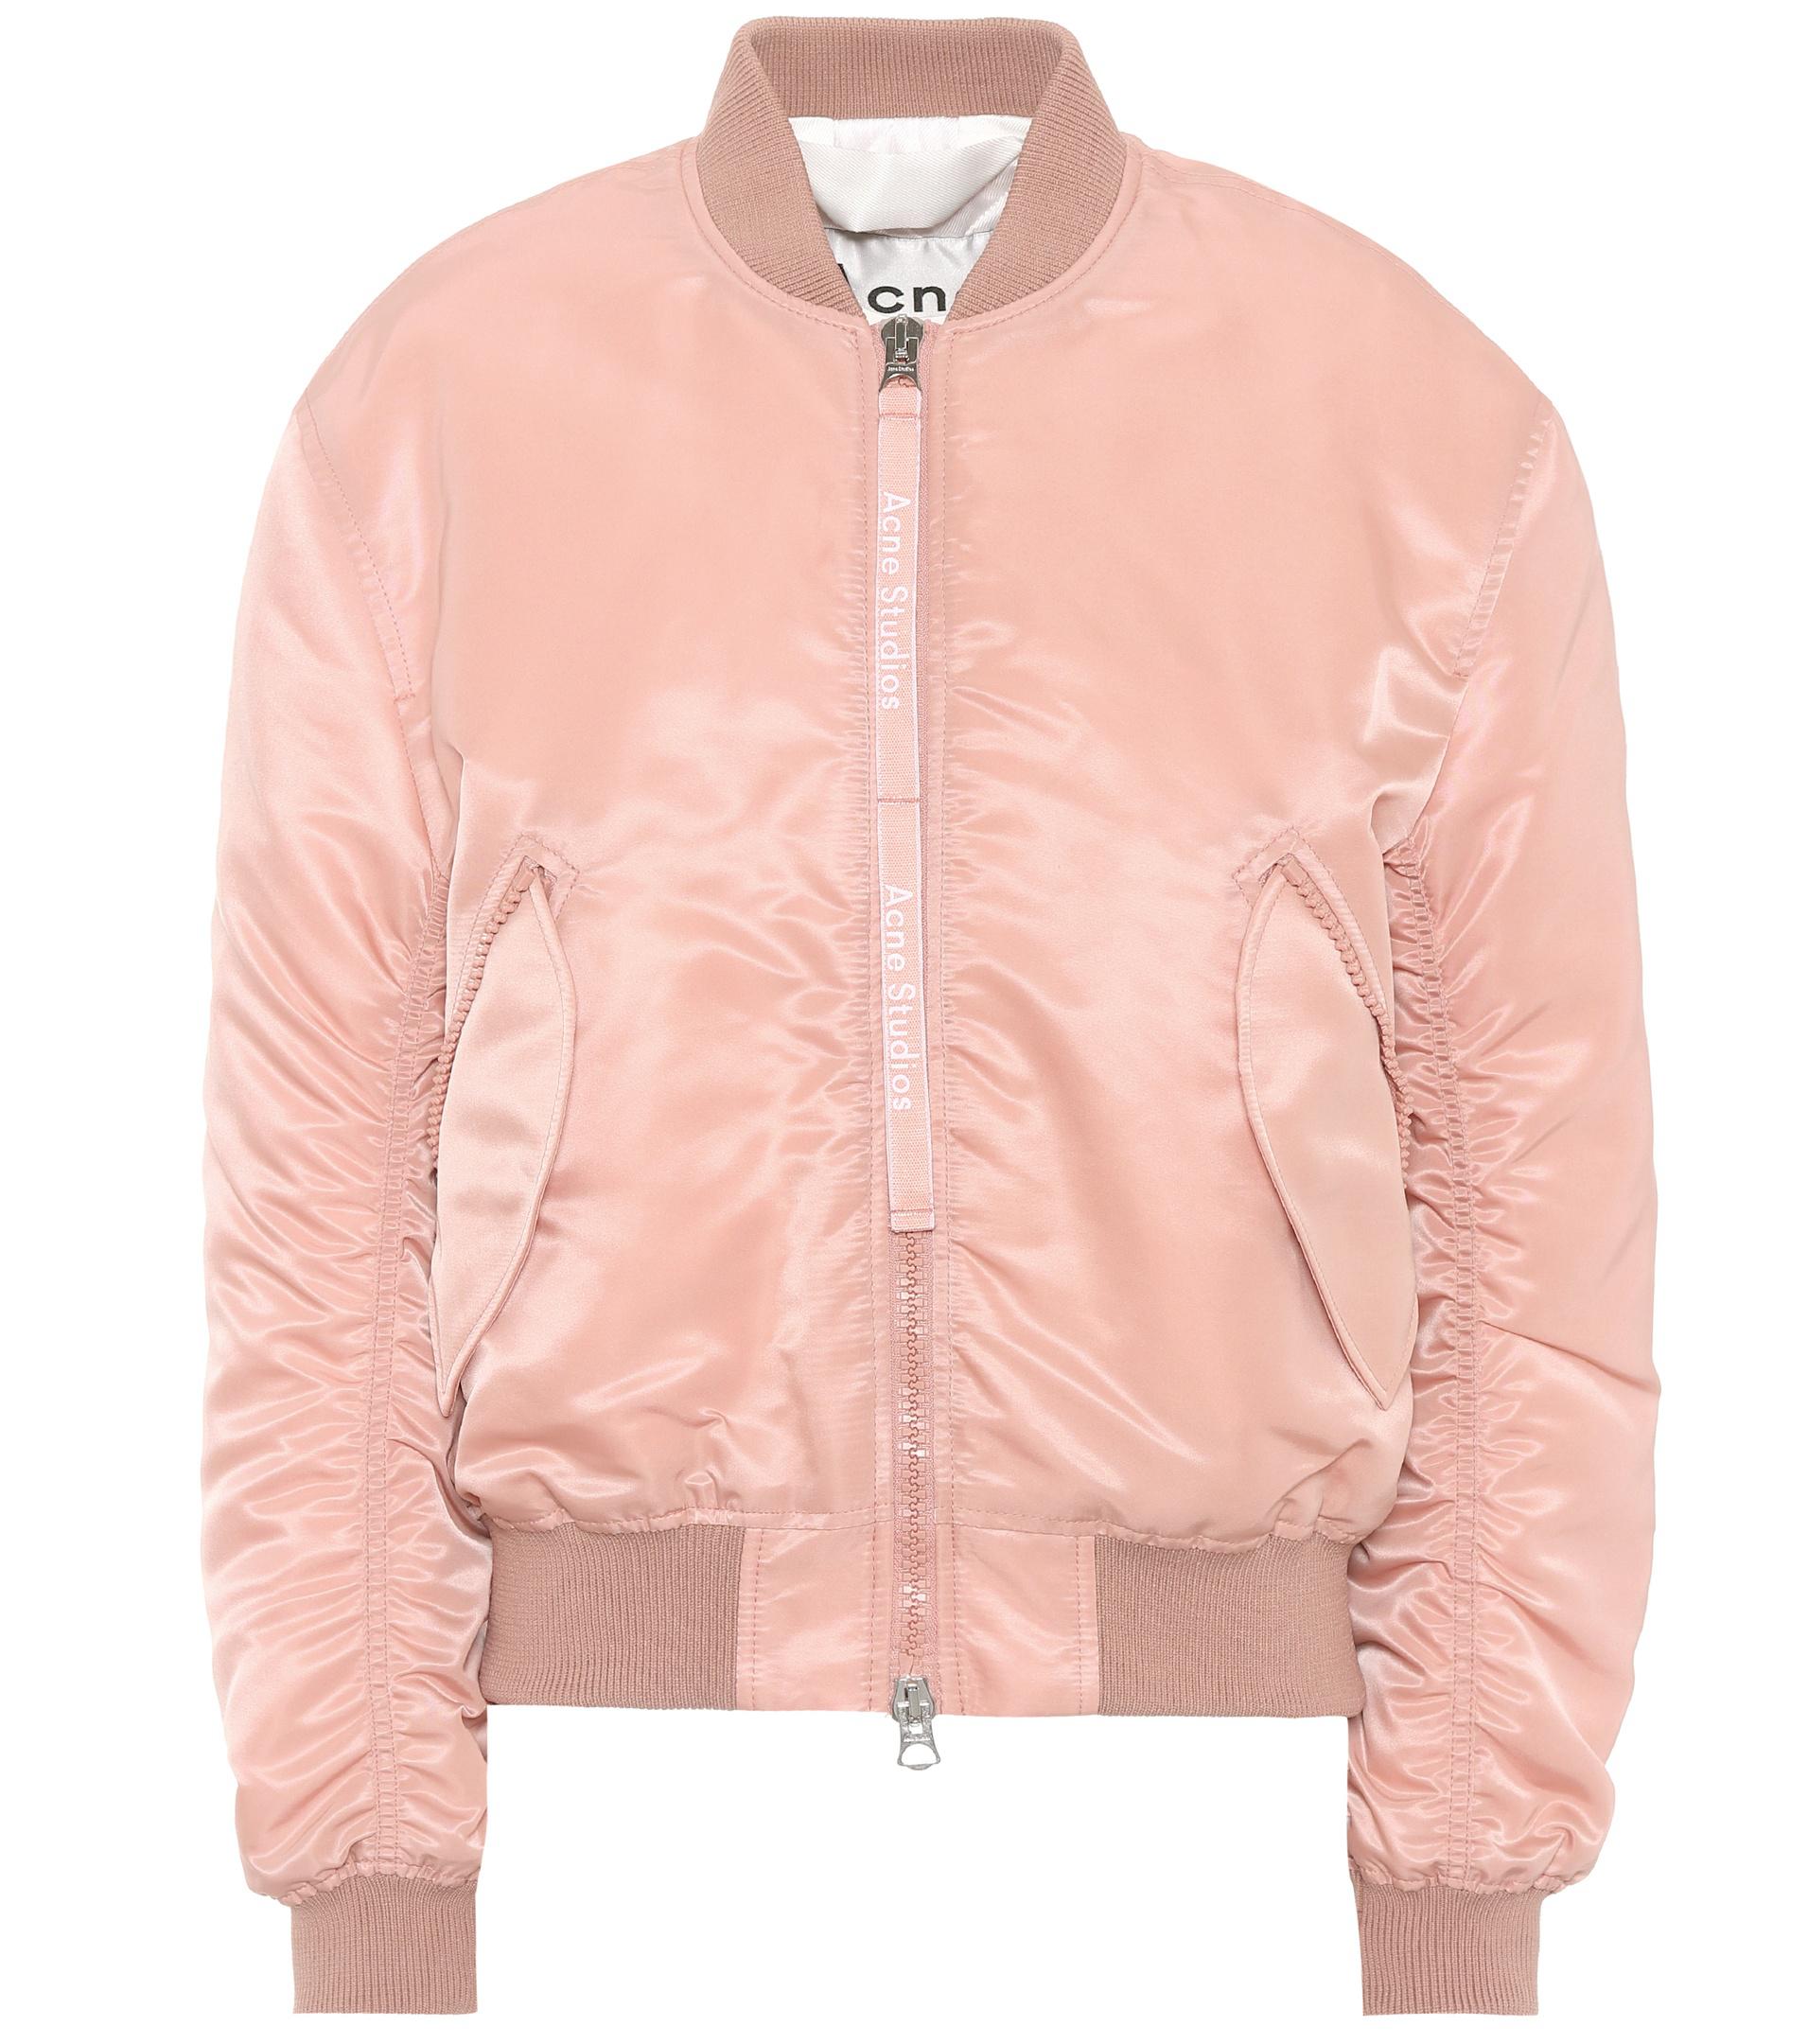 Acne Studios Clea Bomber Jacket in Pink - Save 30% - Lyst